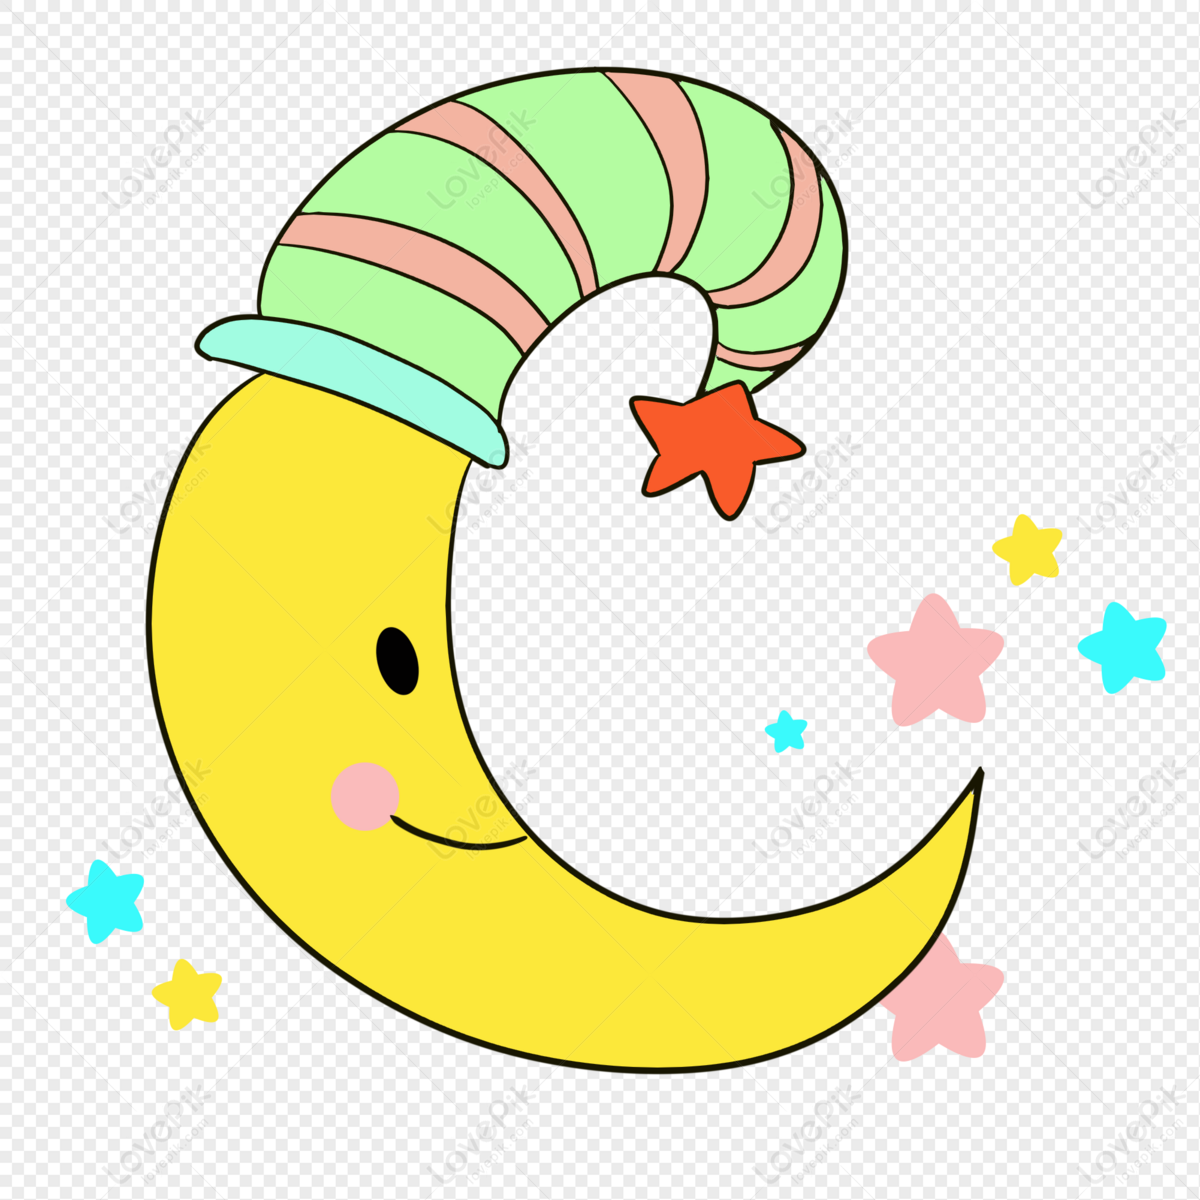 Cartoon Moon PNG Image Free Download And Clipart Image For Free Download -  Lovepik | 401334271